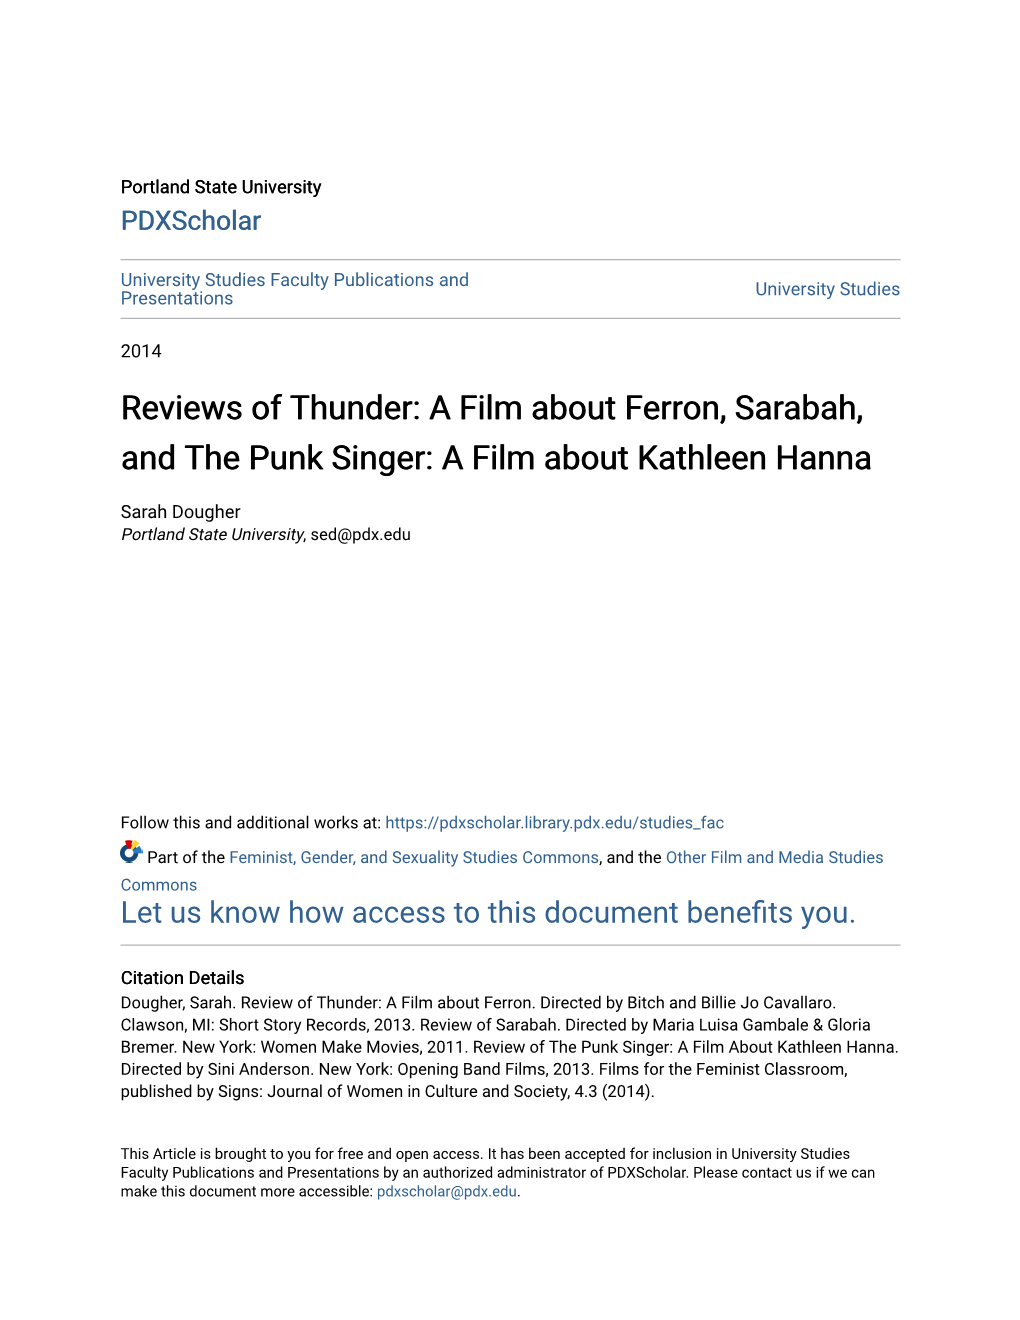 A Film About Ferron, Sarabah, and the Punk Singer: a Film About Kathleen Hanna